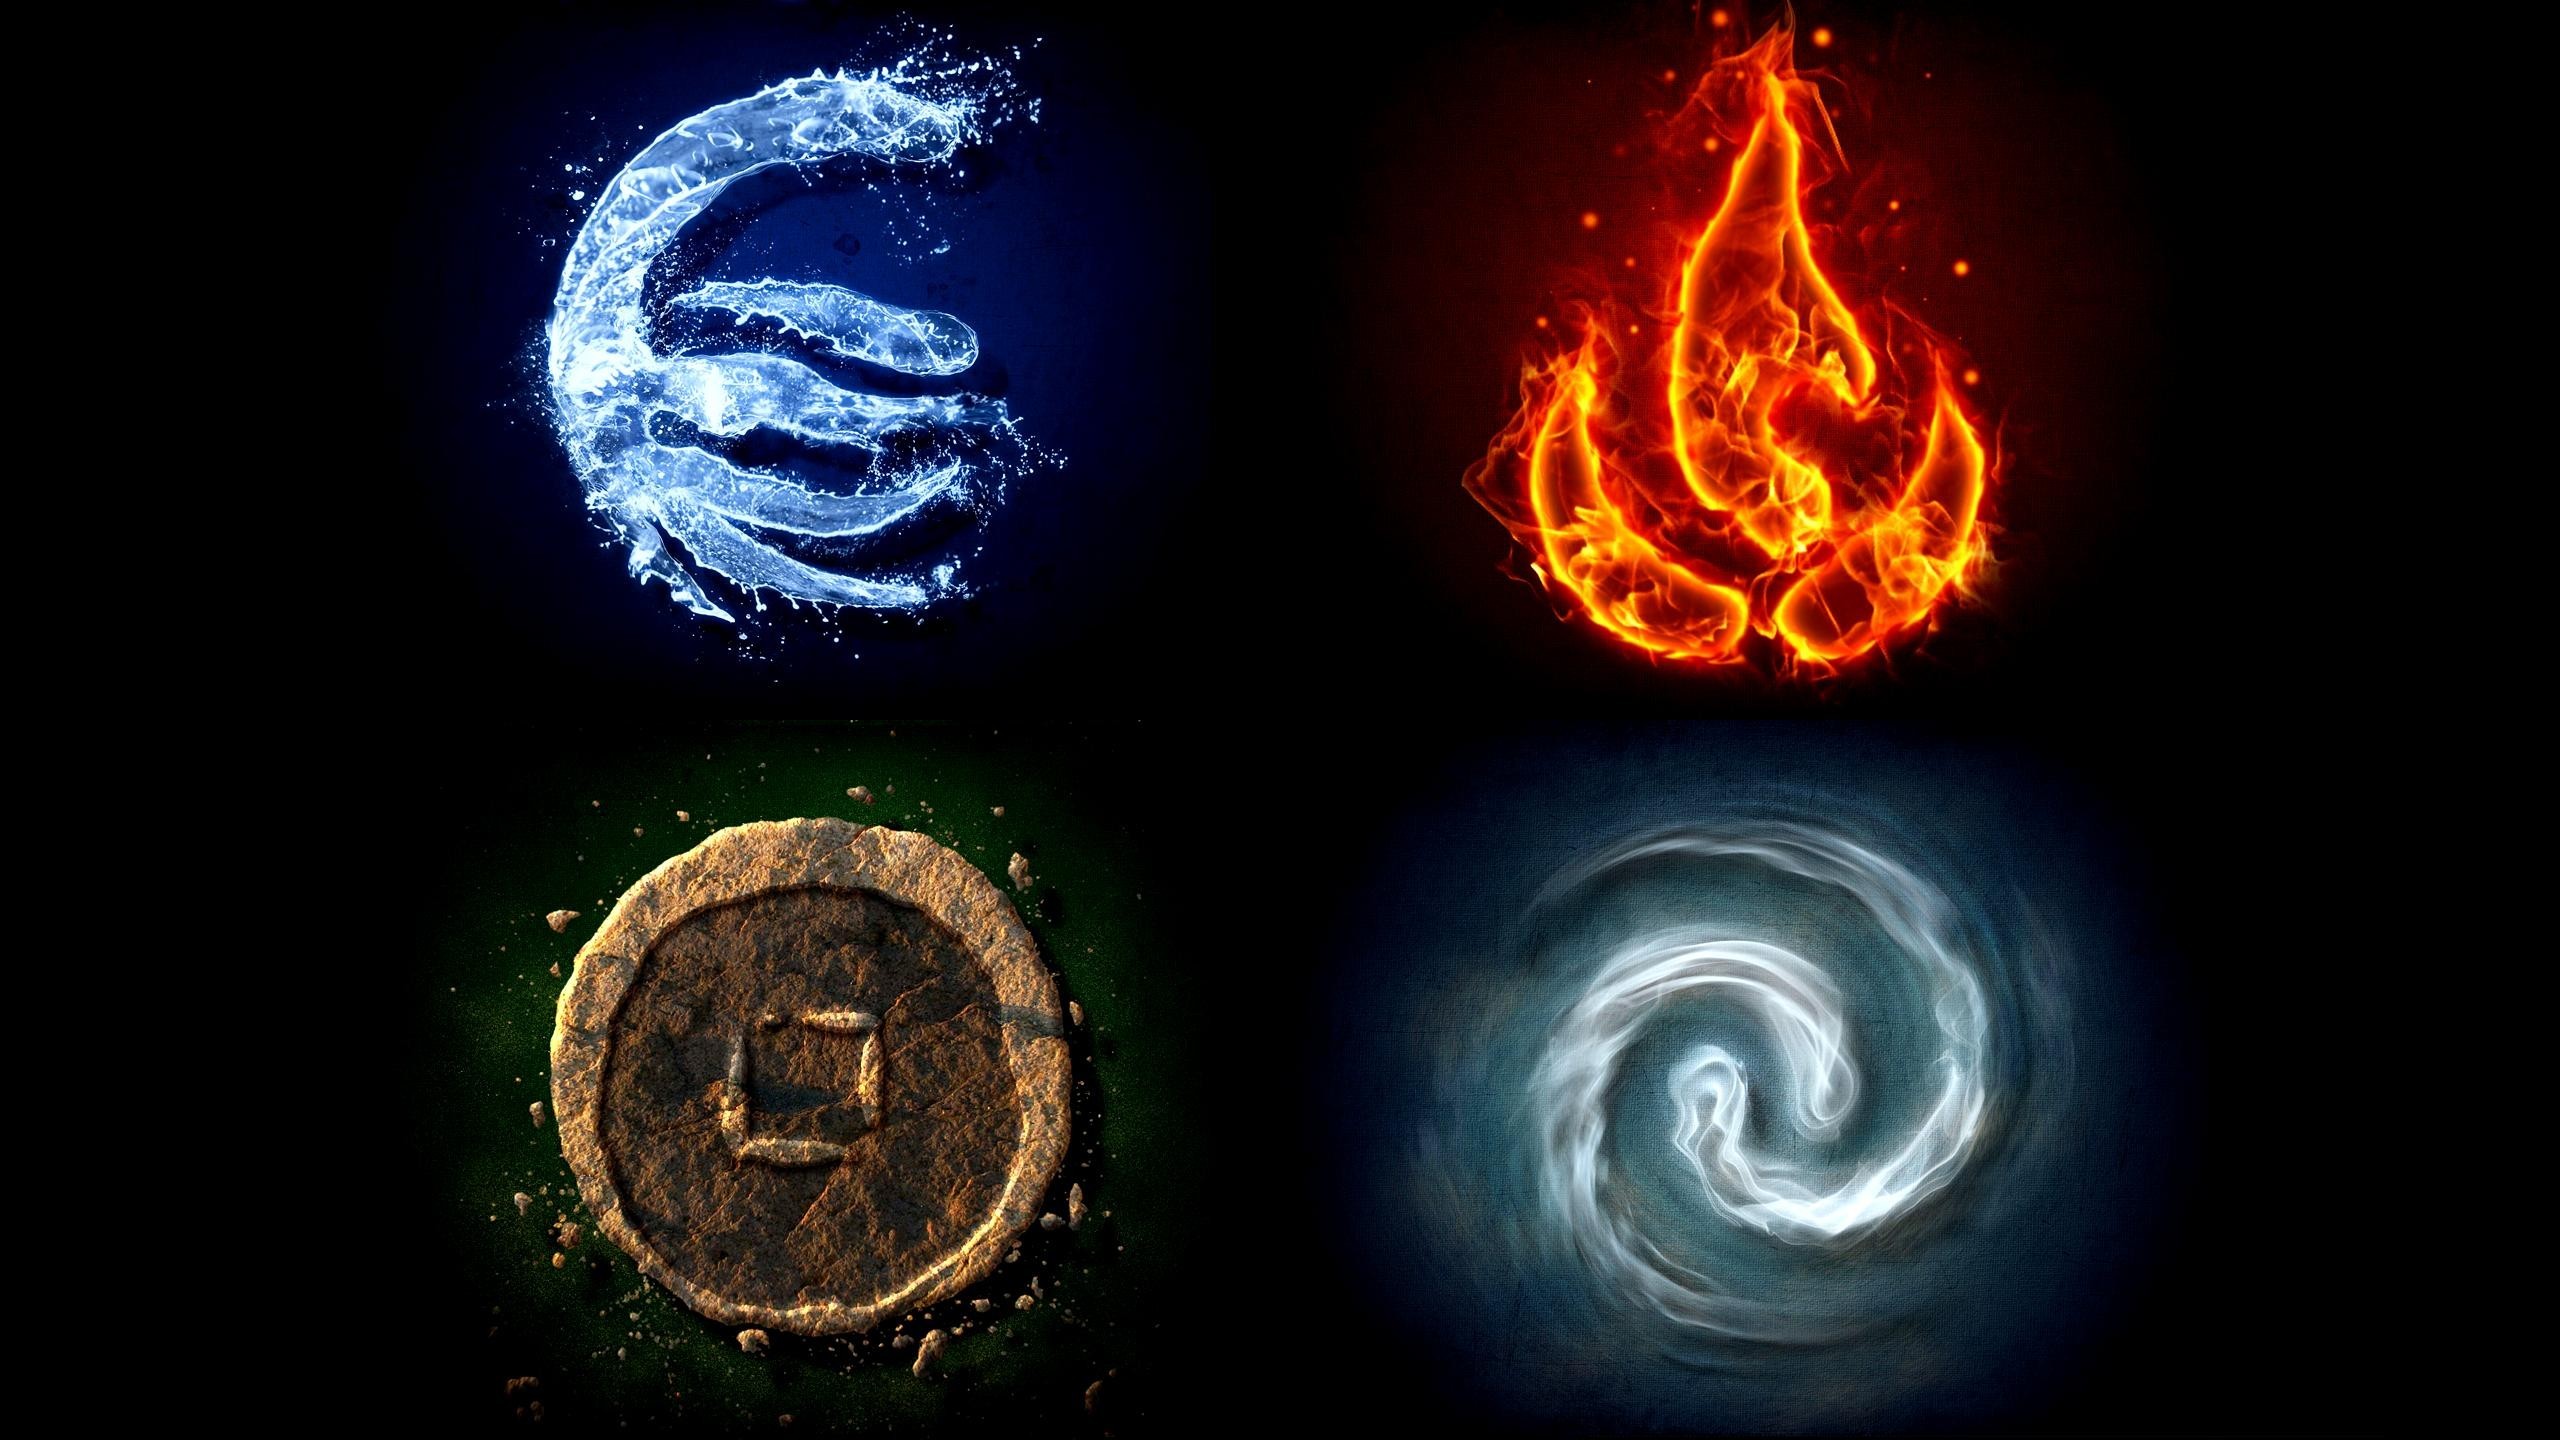 General 2560x1440 Avatar: The Last Airbender elements water fire Earth wind digital art simple background